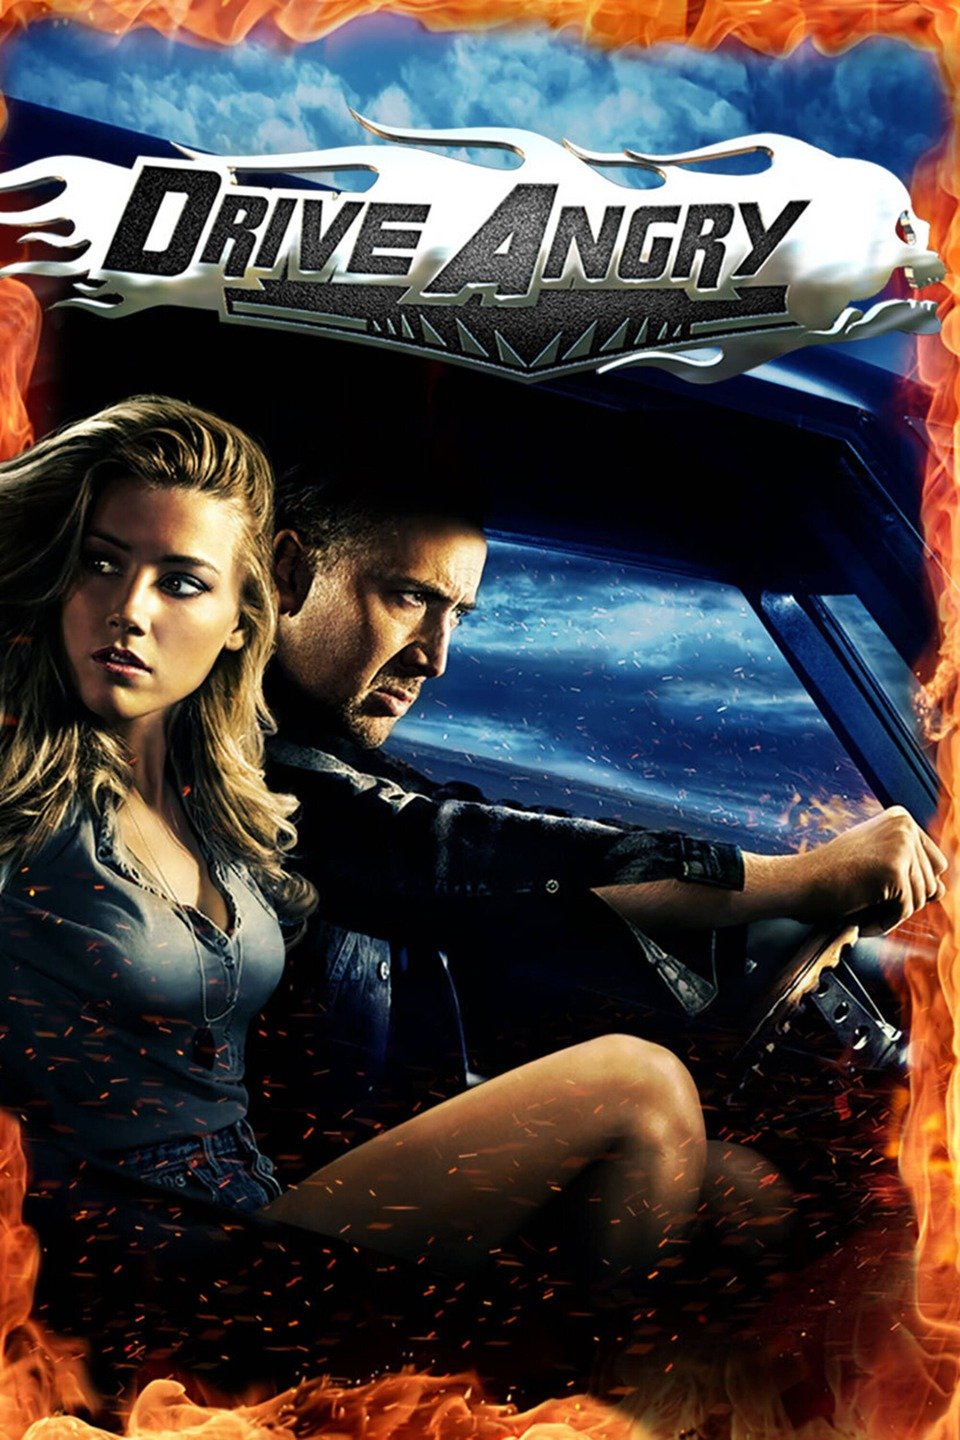 nudity in drive angry movie